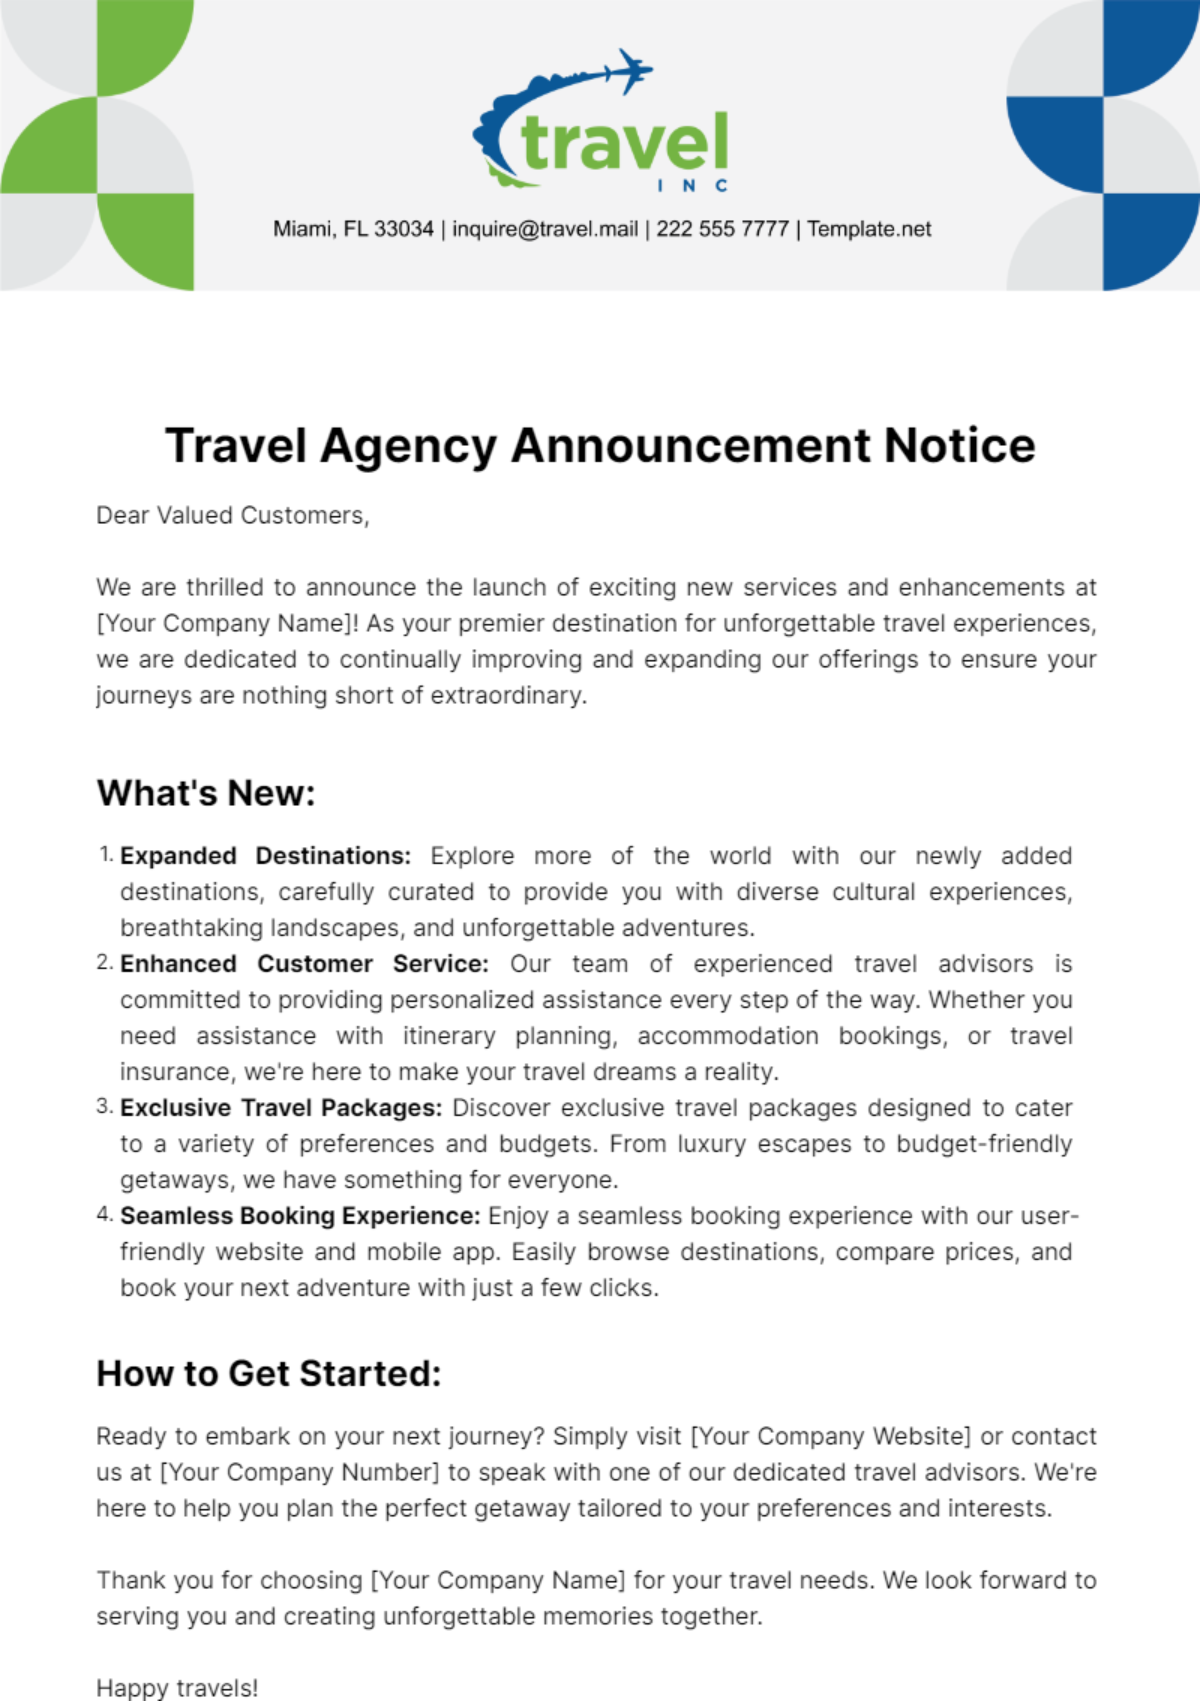 Travel Agency Announcement Notice Template